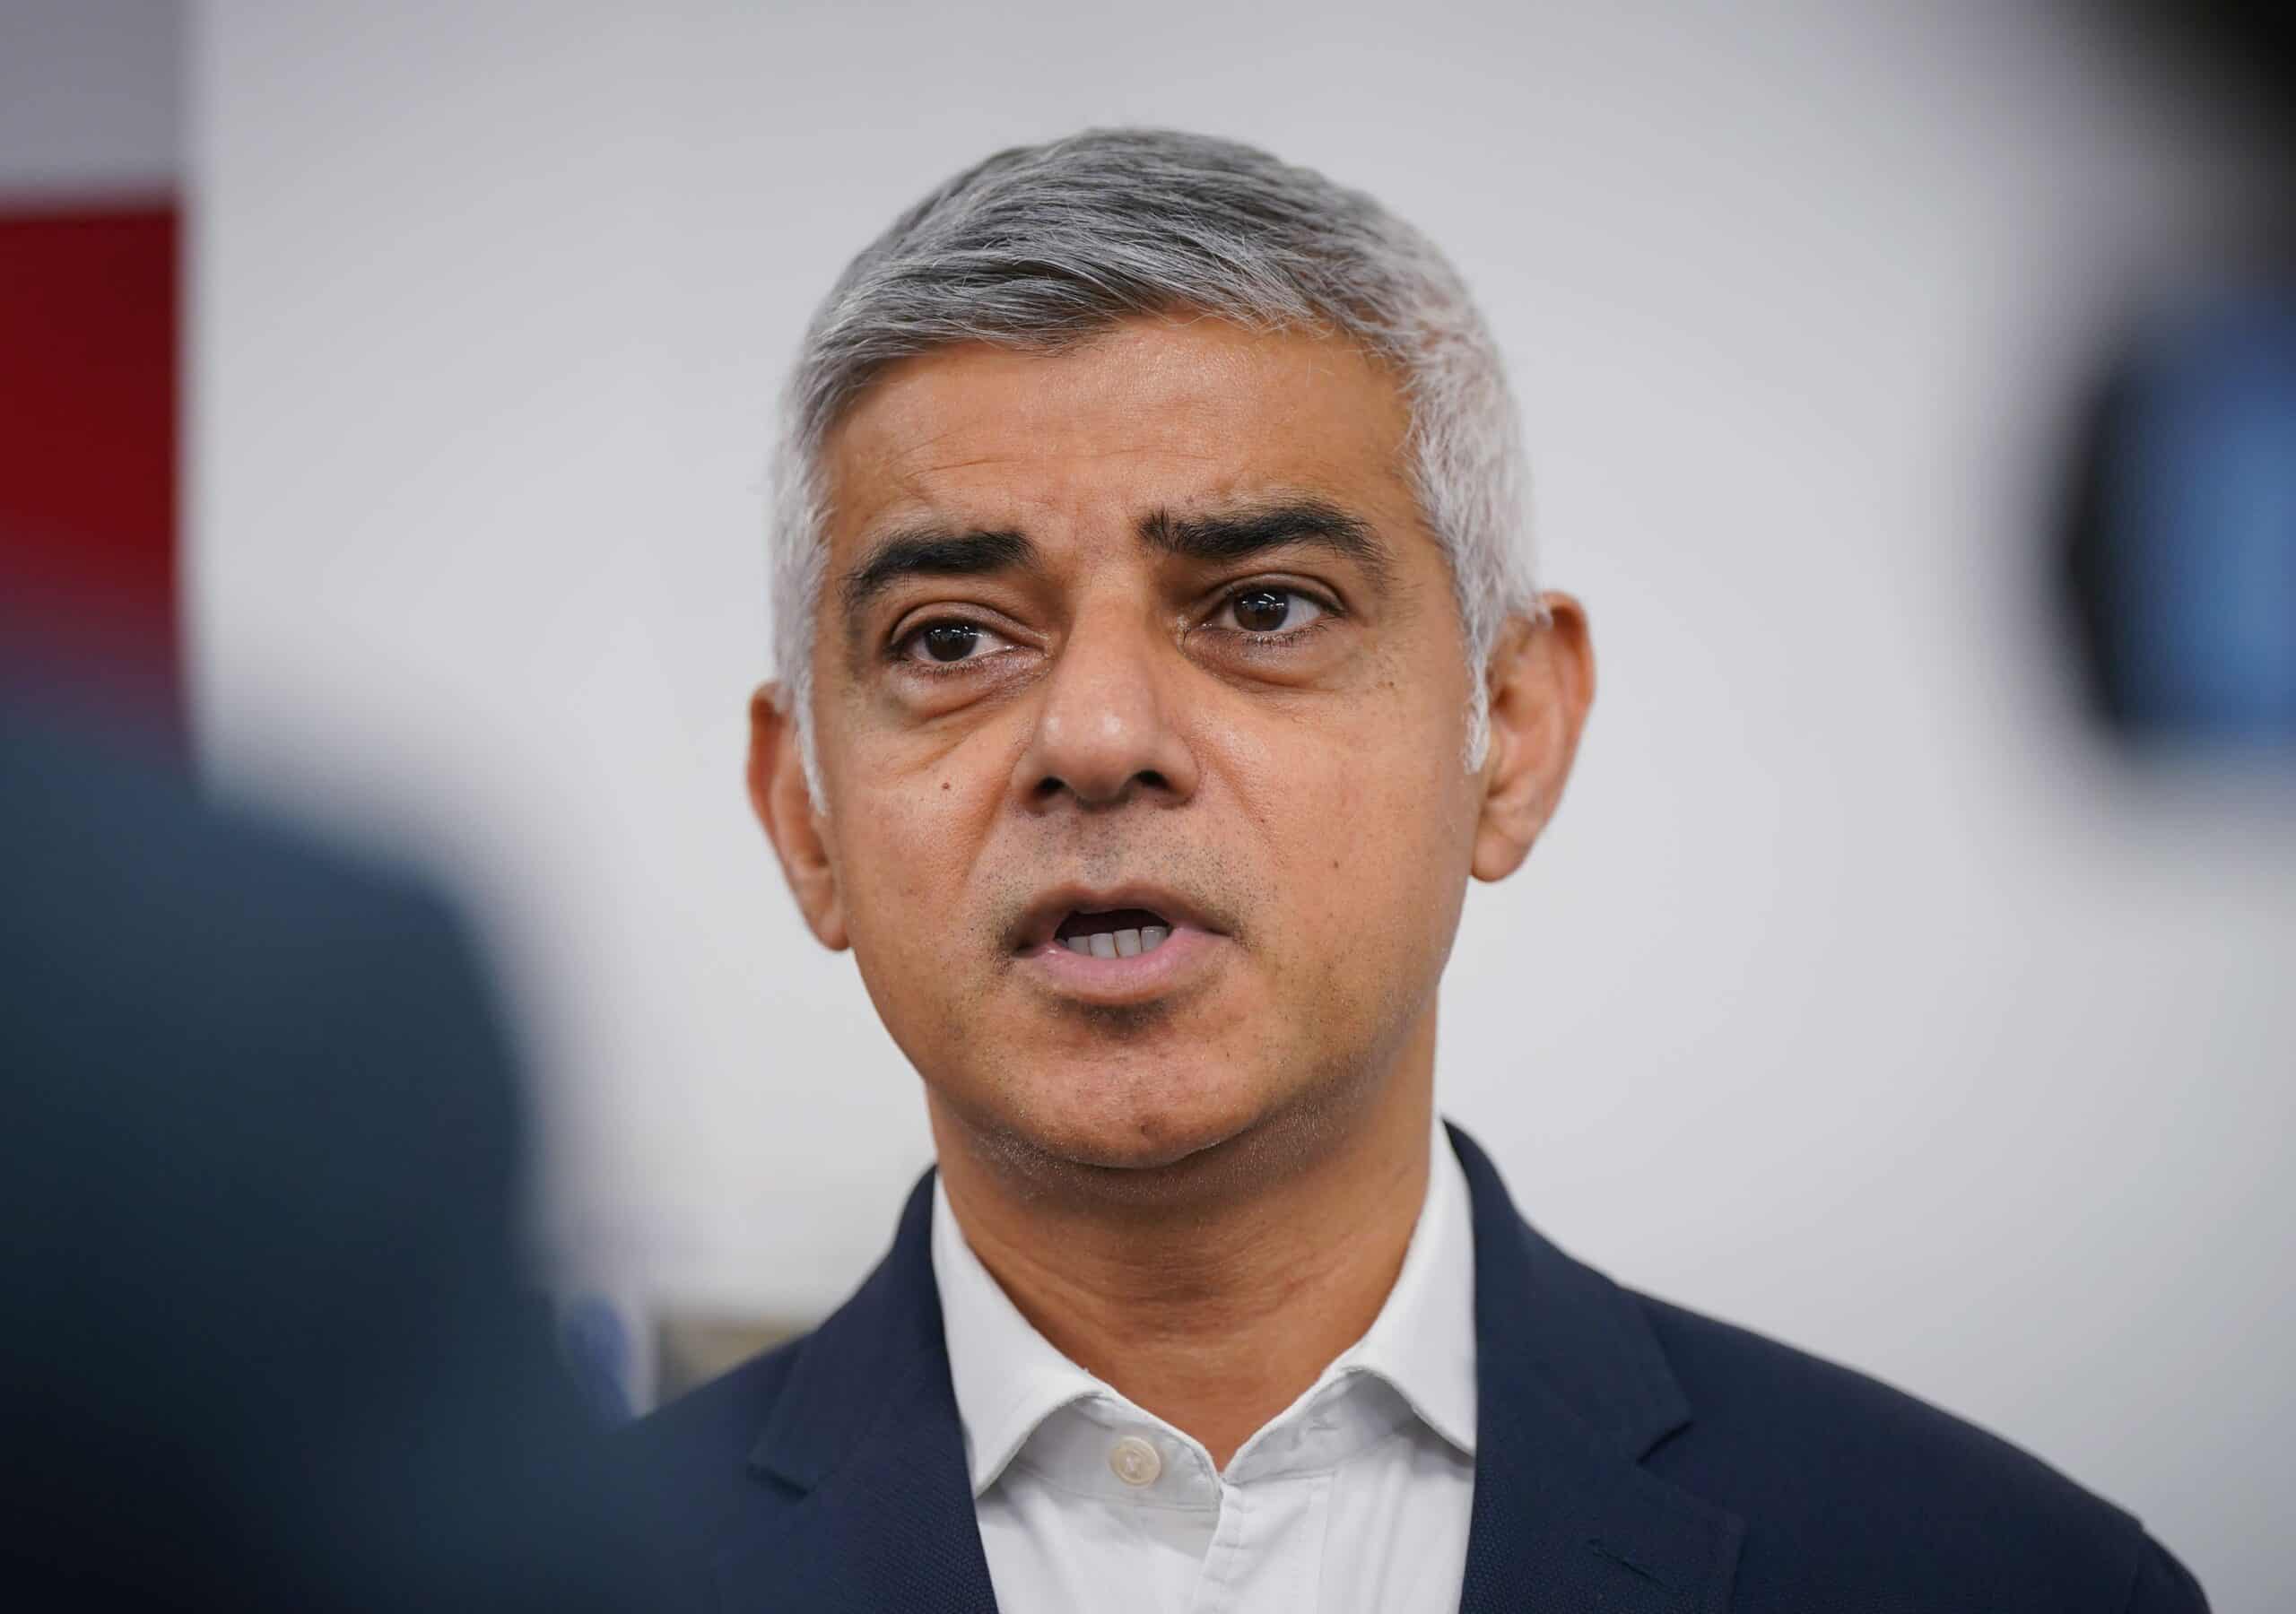 ‘Seize £1bn Russian-owned properties, use money to build new homes’ – Sadiq Khan